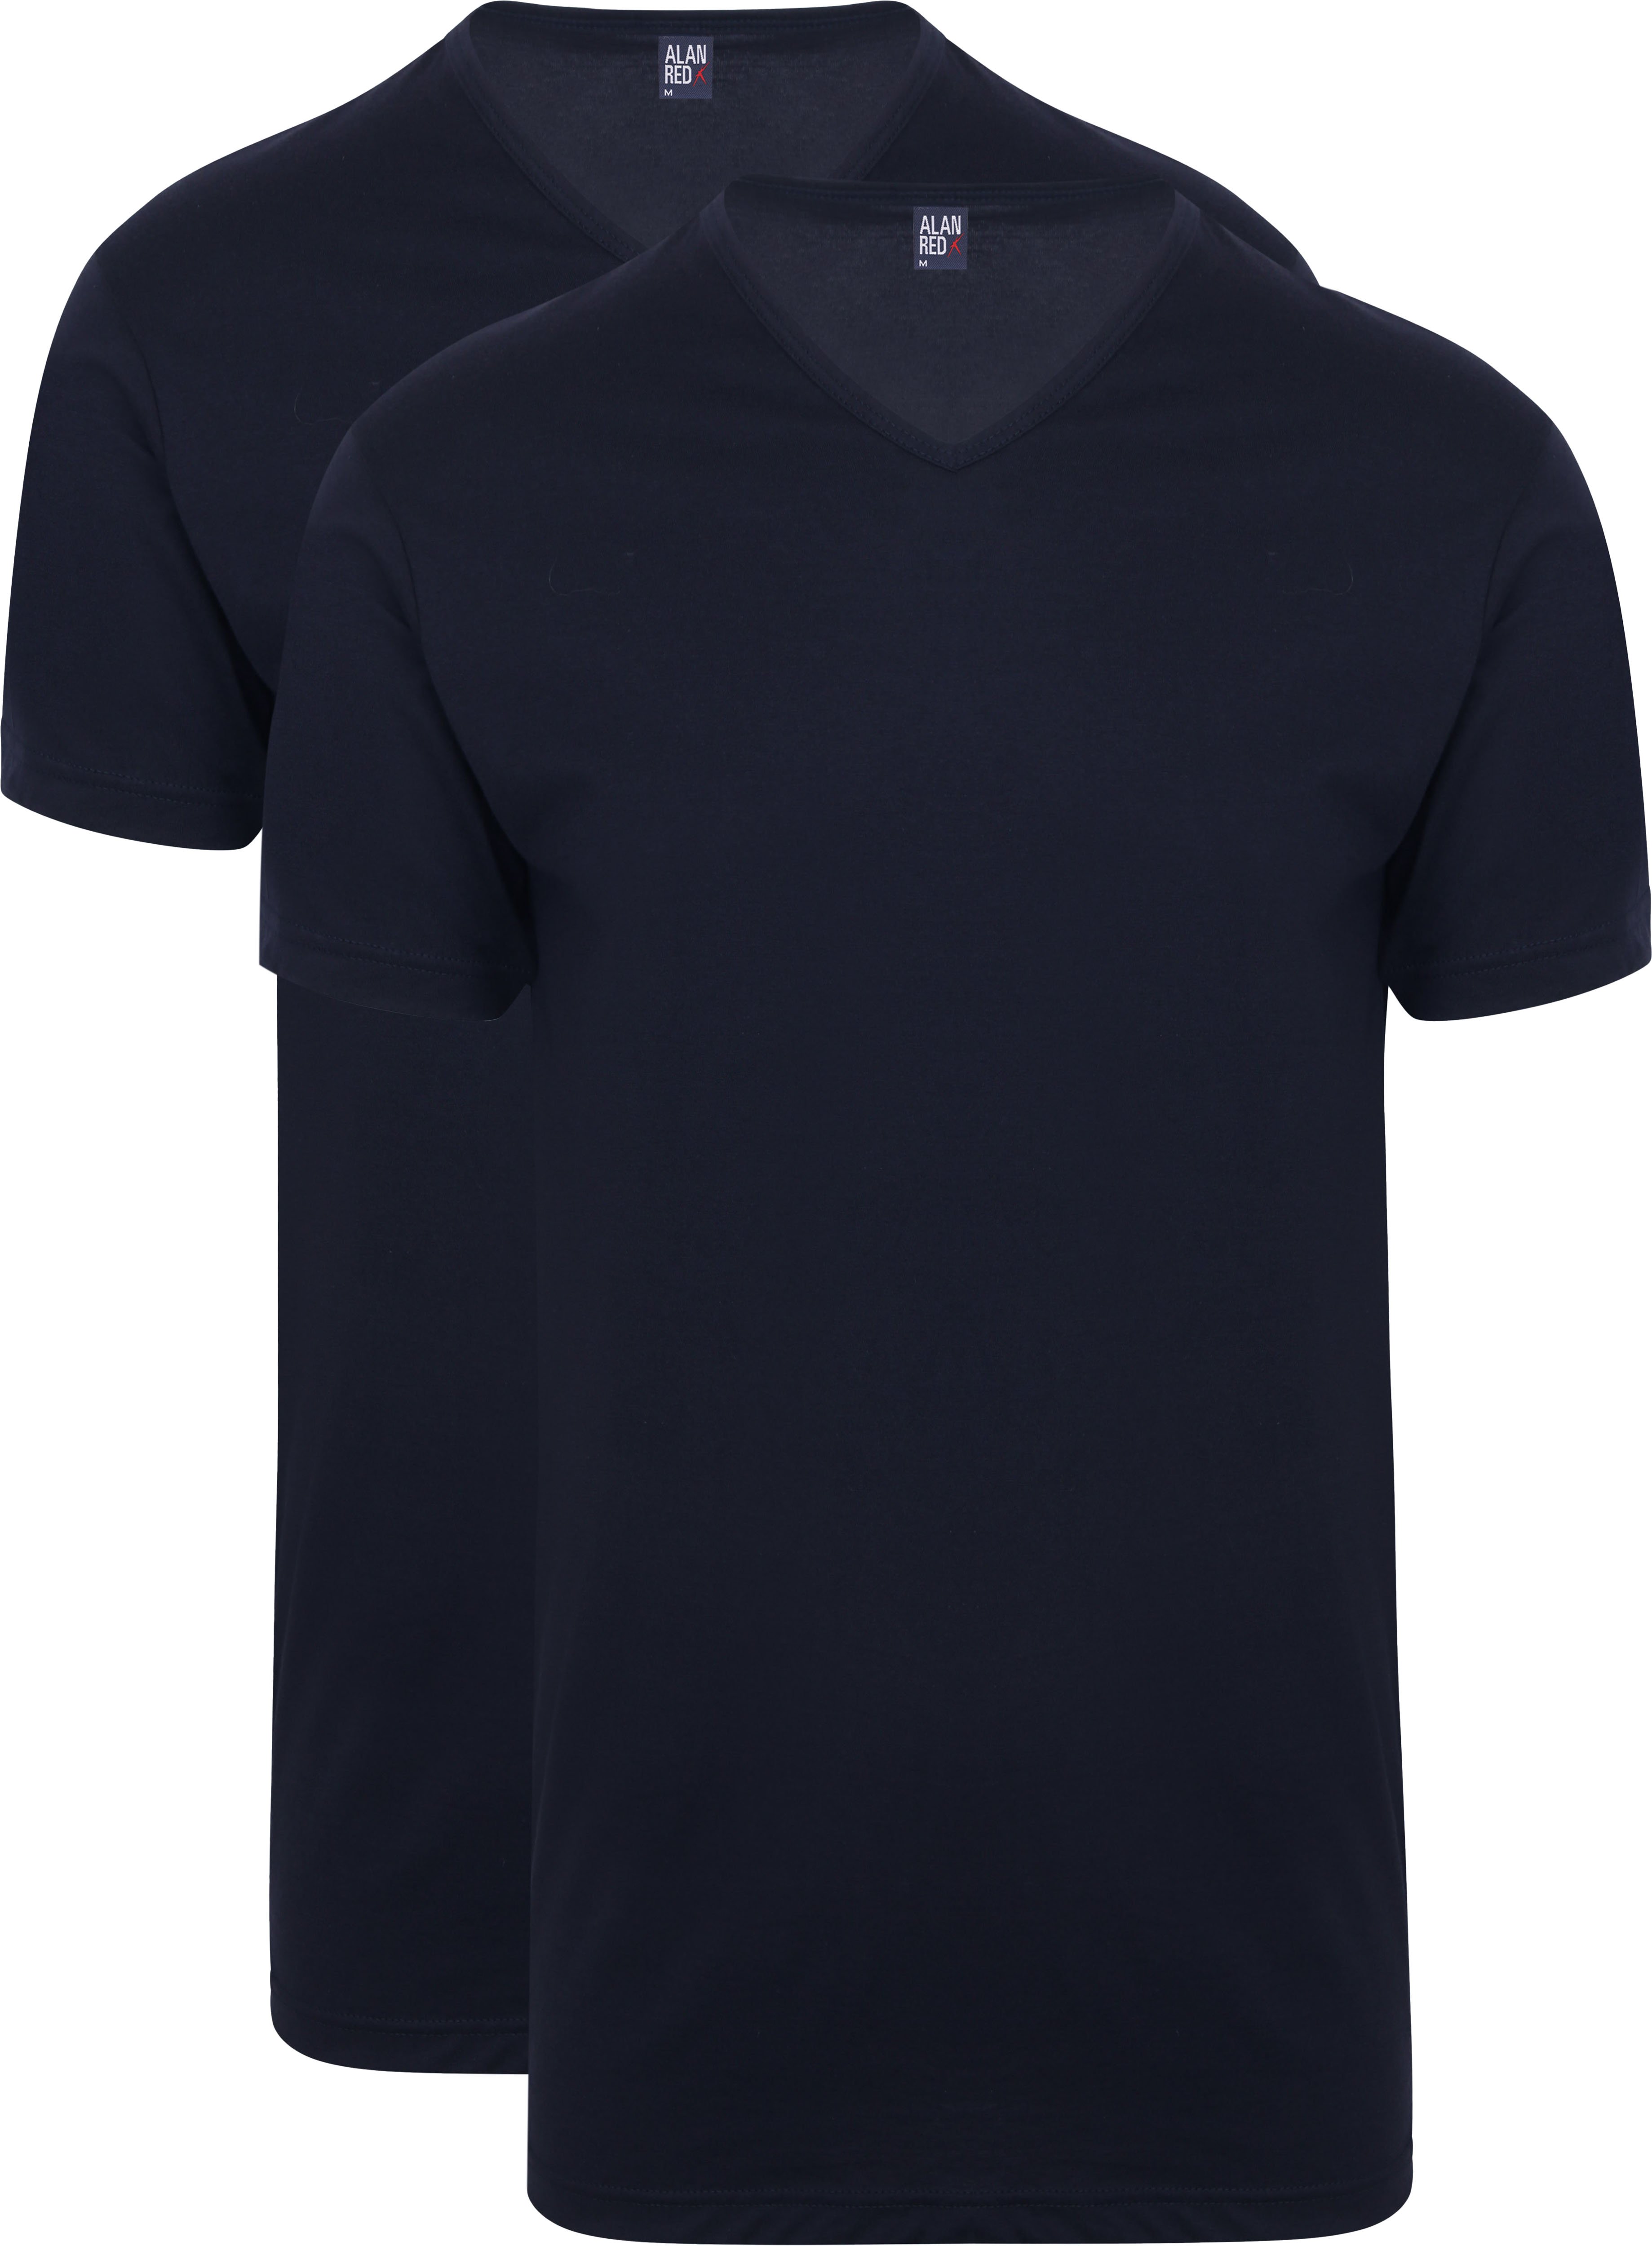 Vermont Extra Lange T-Shirts Navy (2Pack)